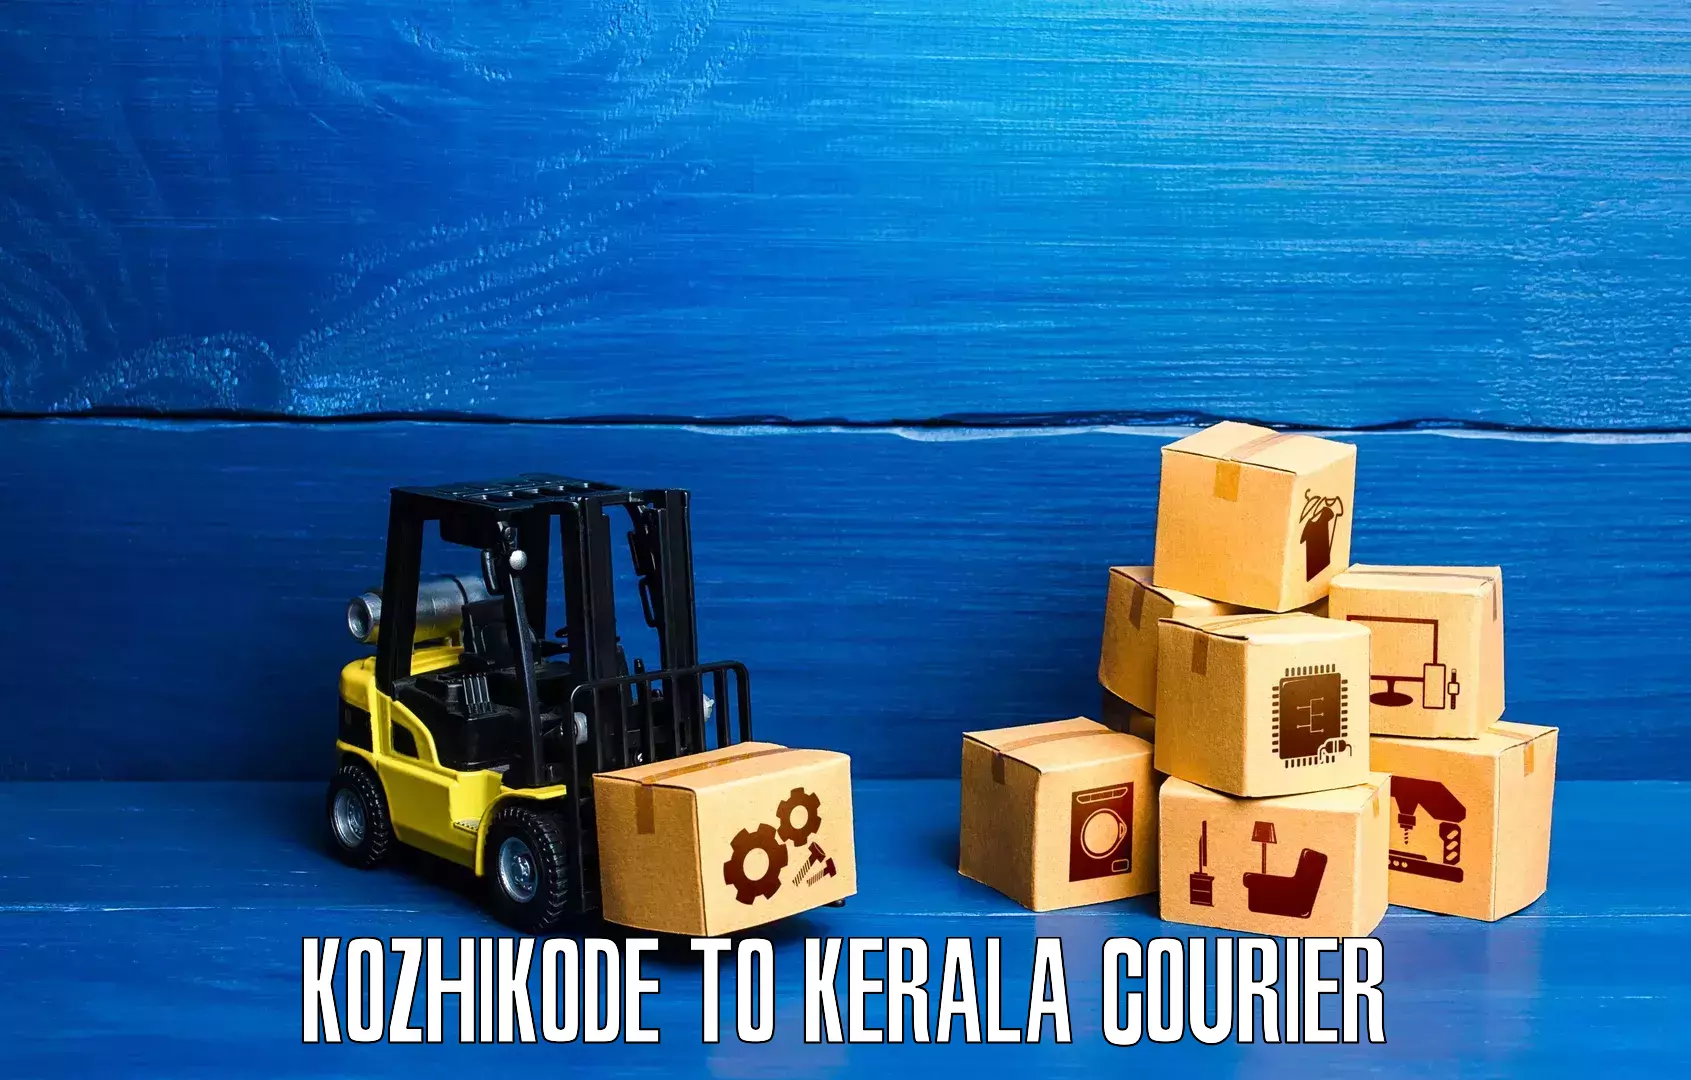 User-friendly delivery service Kozhikode to Guruvayoor